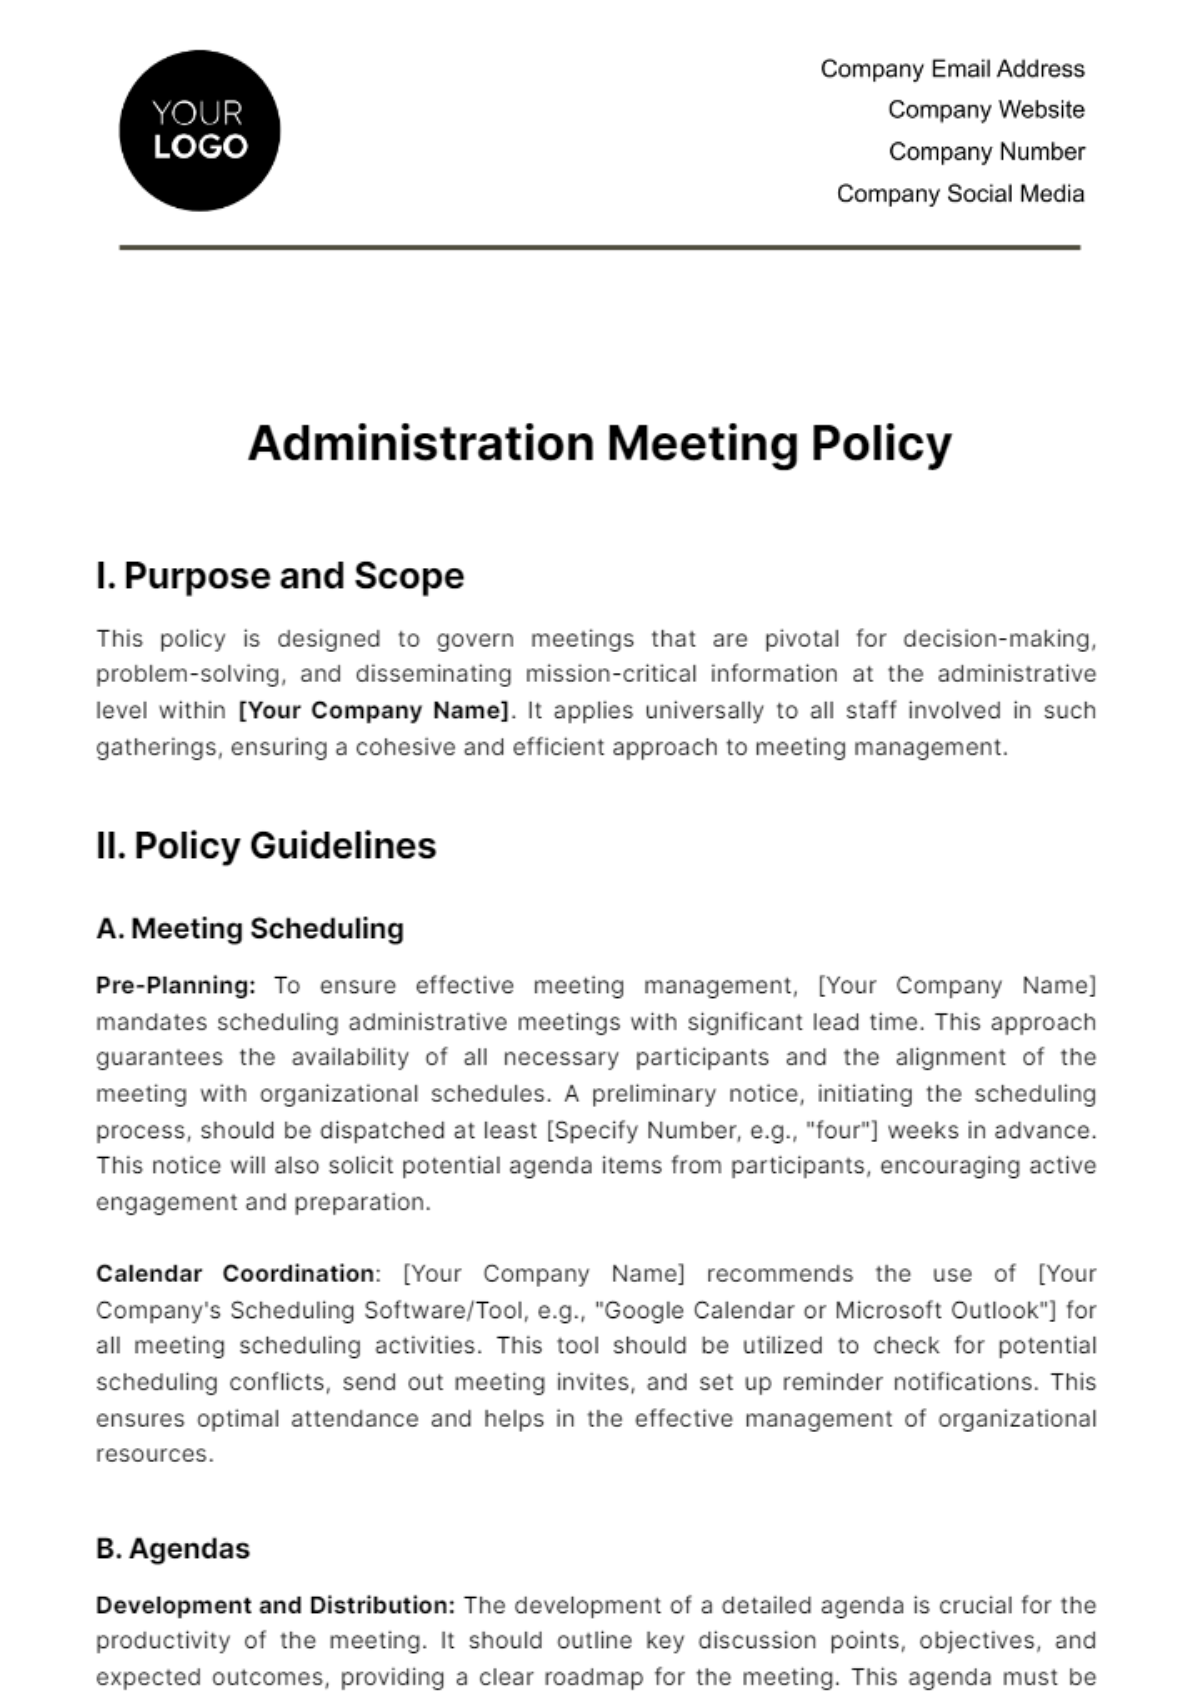 Free Administration Meeting Policy Template